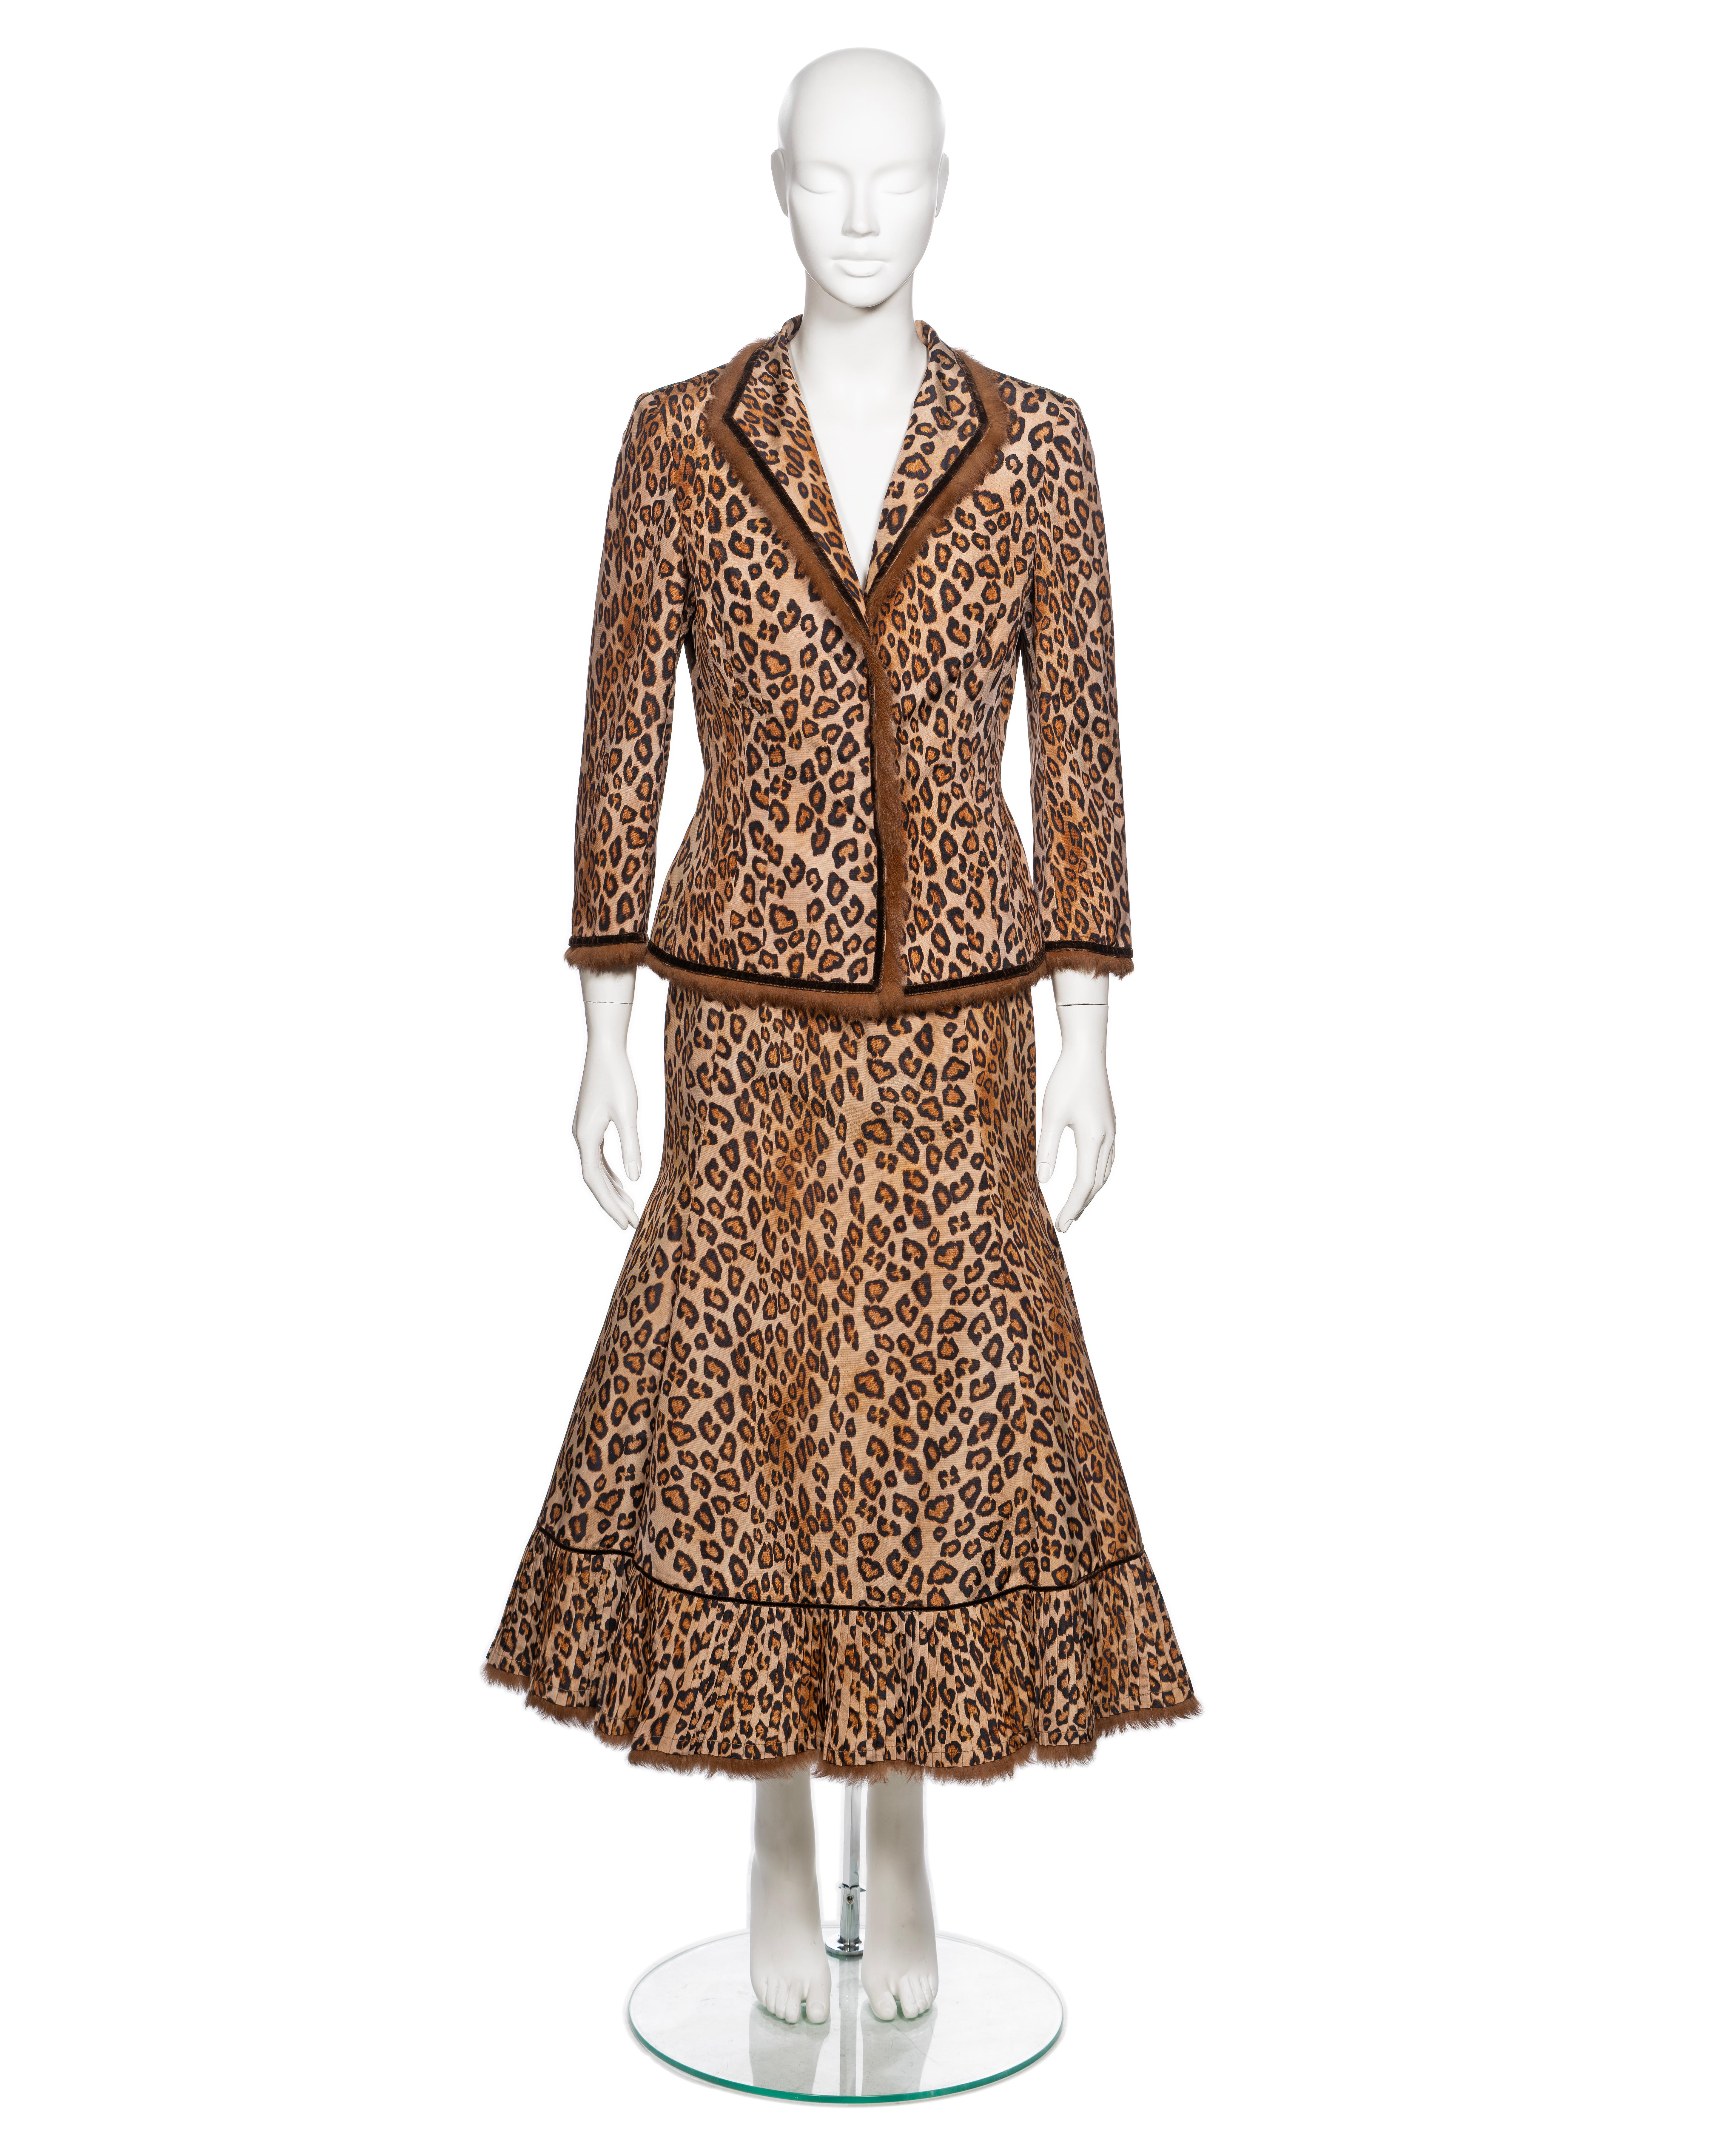 ▪ Brand: Alexander McQueen
▪ Creative Director: Lee Alexander McQueen
▪ Collection: The Man Who Knew Too Much, Fall-Winter 2005
▪ Fabric: Silk Twill, Rabbit Fur
▪ Details: Built-in Petticoat, Velvet Ribbon Trim, Knife Pleats
▪ Contents: